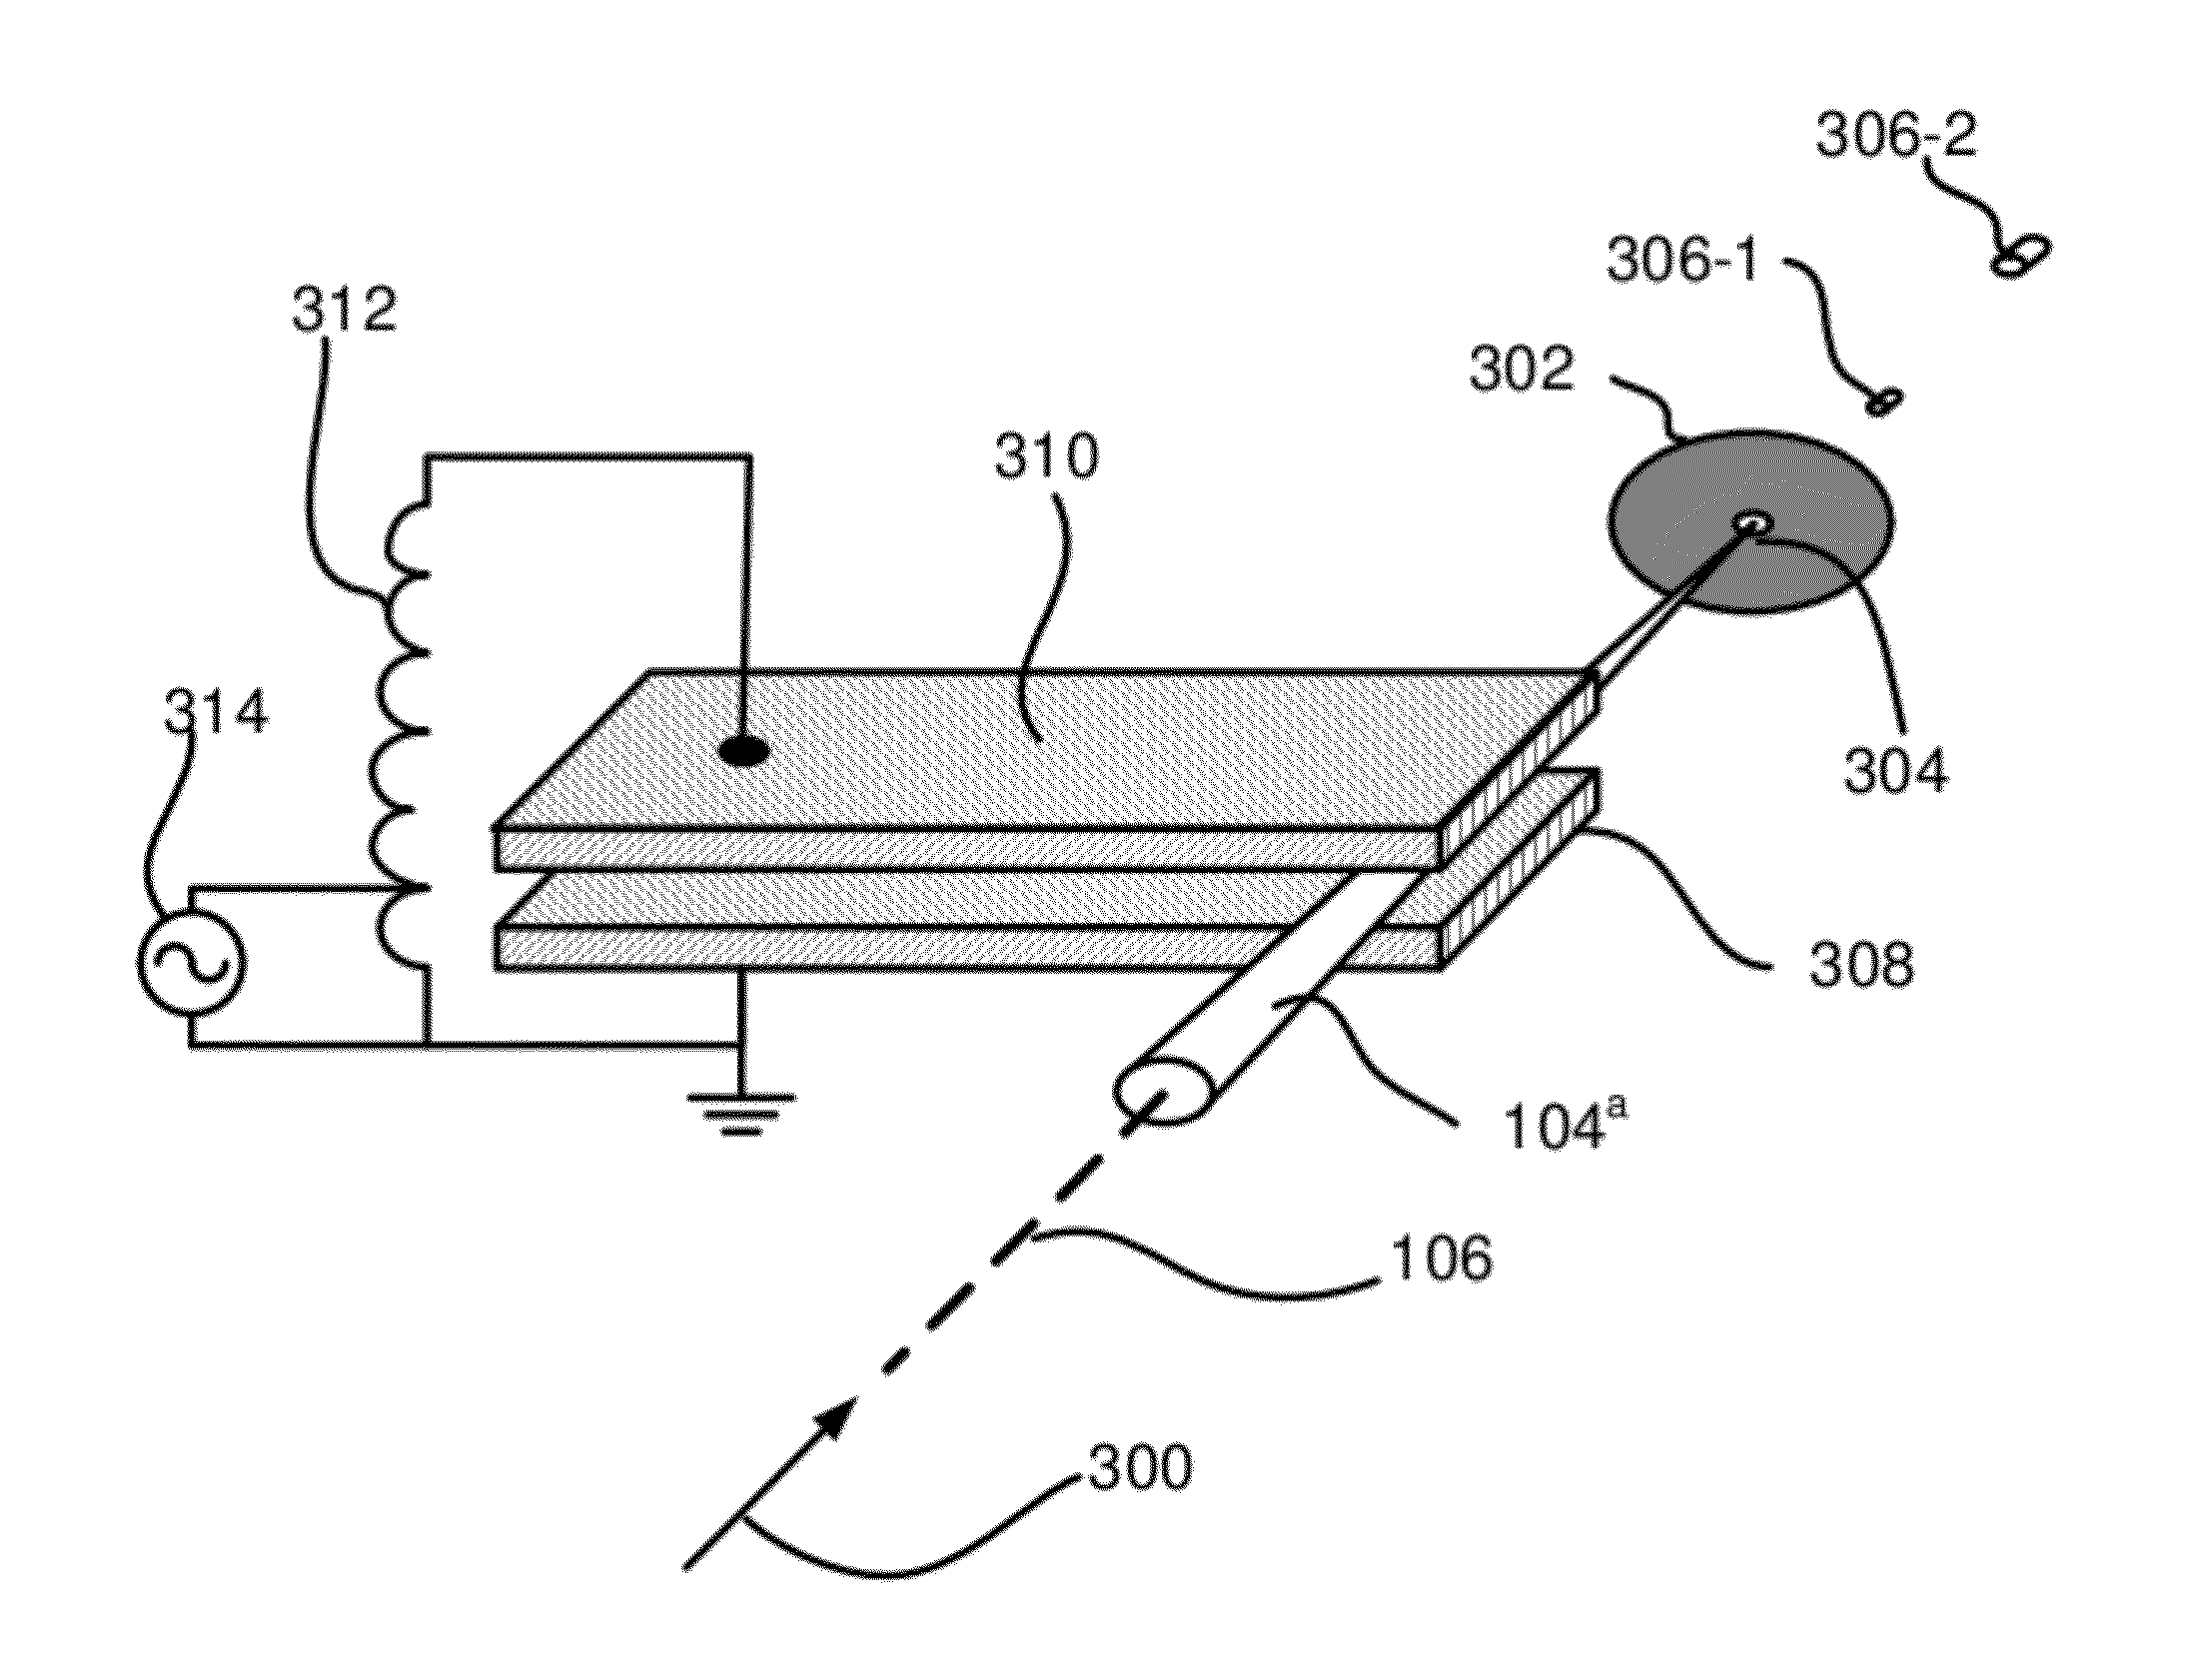 Beam Blanker for Interrupting a Beam of Charged Particles